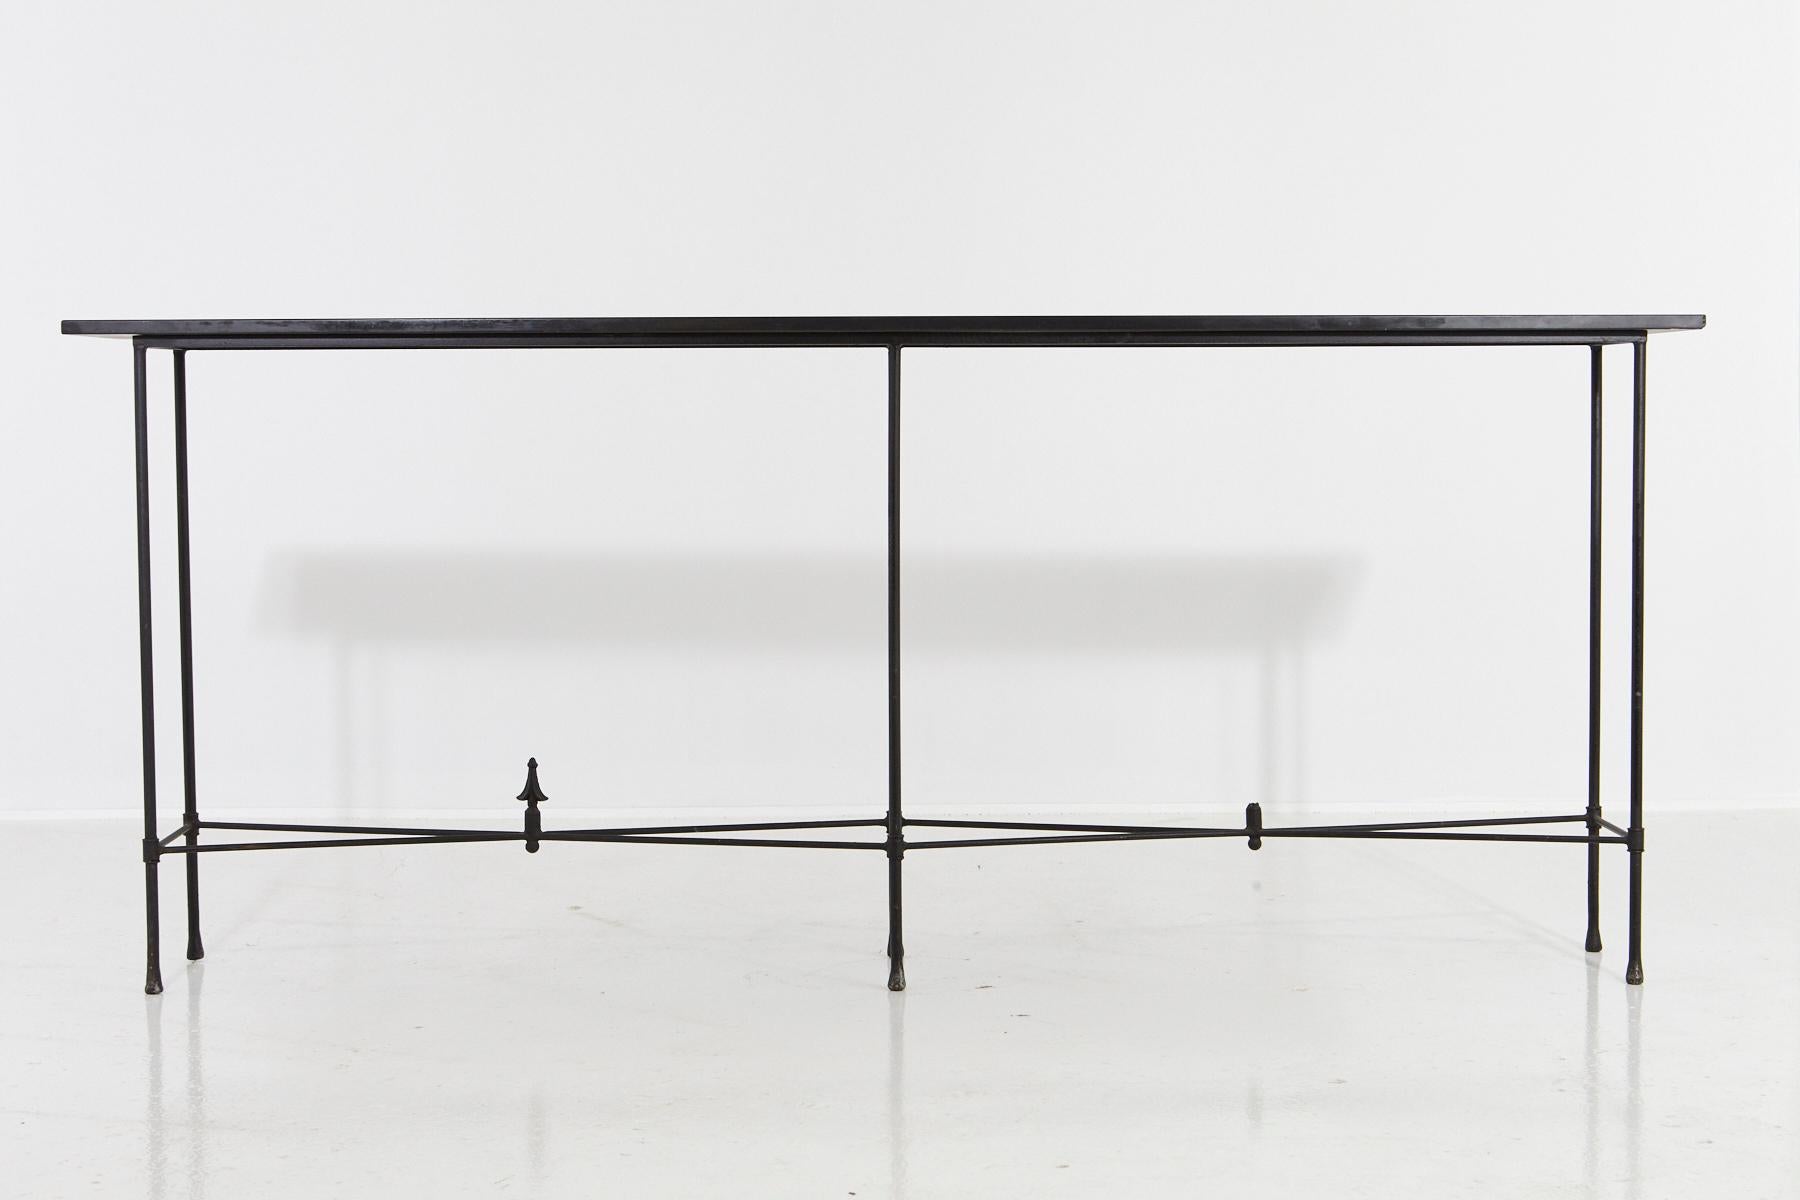 Minimalistic custom made, 7 ft. long wrought iron console with slate top, circa 1980s.
The console has a very, minimalistic, elegant appearance through its thin metal construction
and the narrow long piece of slate.
One of the finials is missing